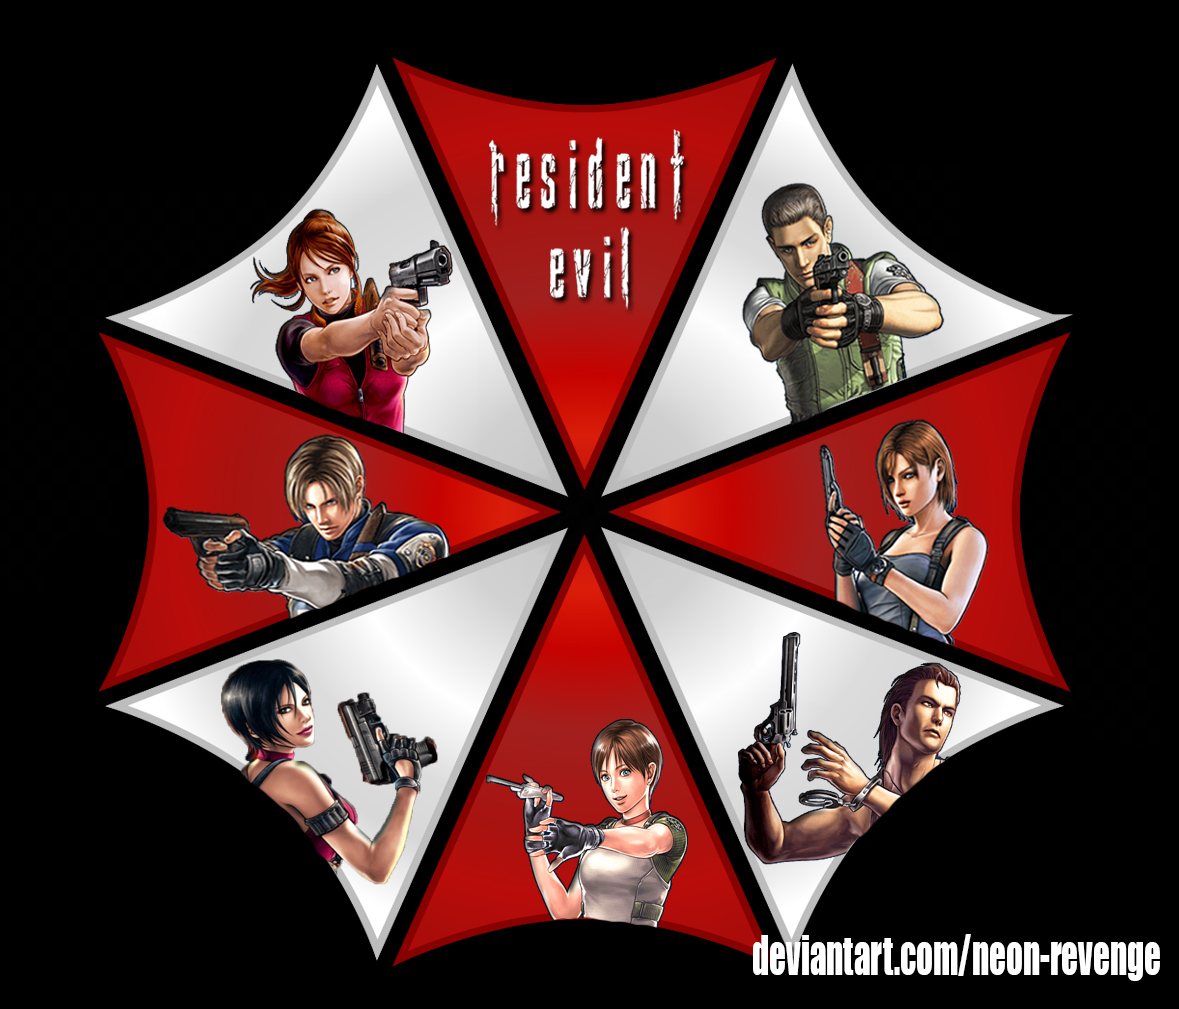 Resident Evil - All Movies Wallpaper by mayfuite on DeviantArt